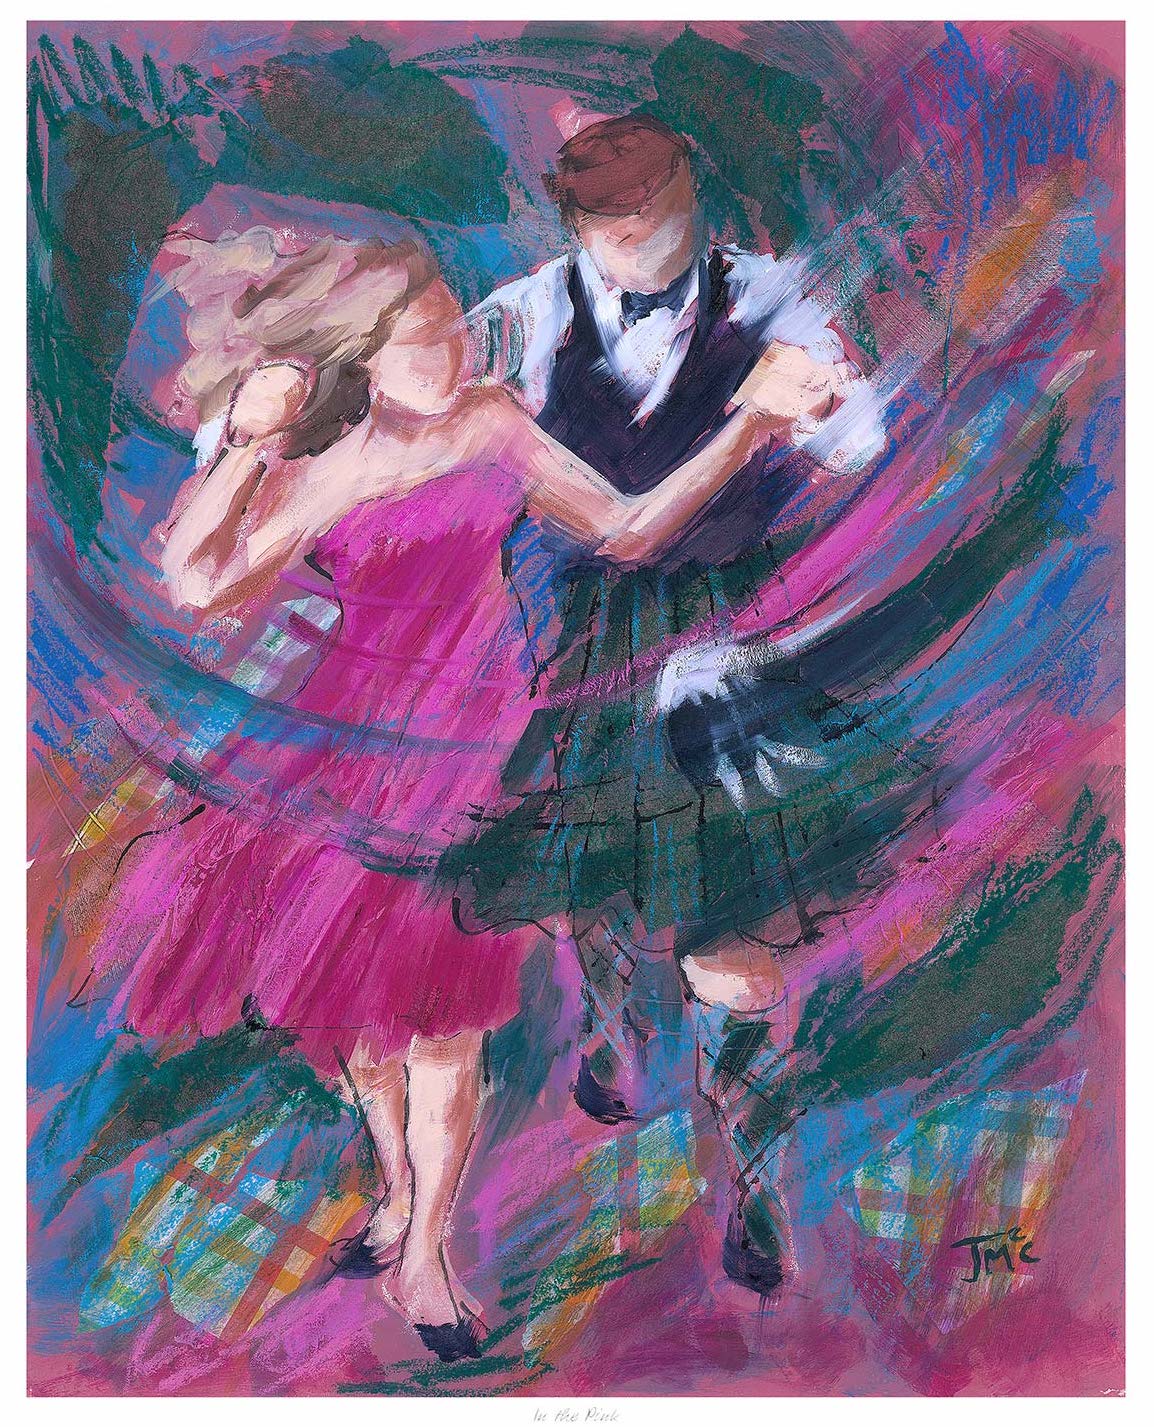 In The Pink Ceilidh Dancers by Janet McCrorie